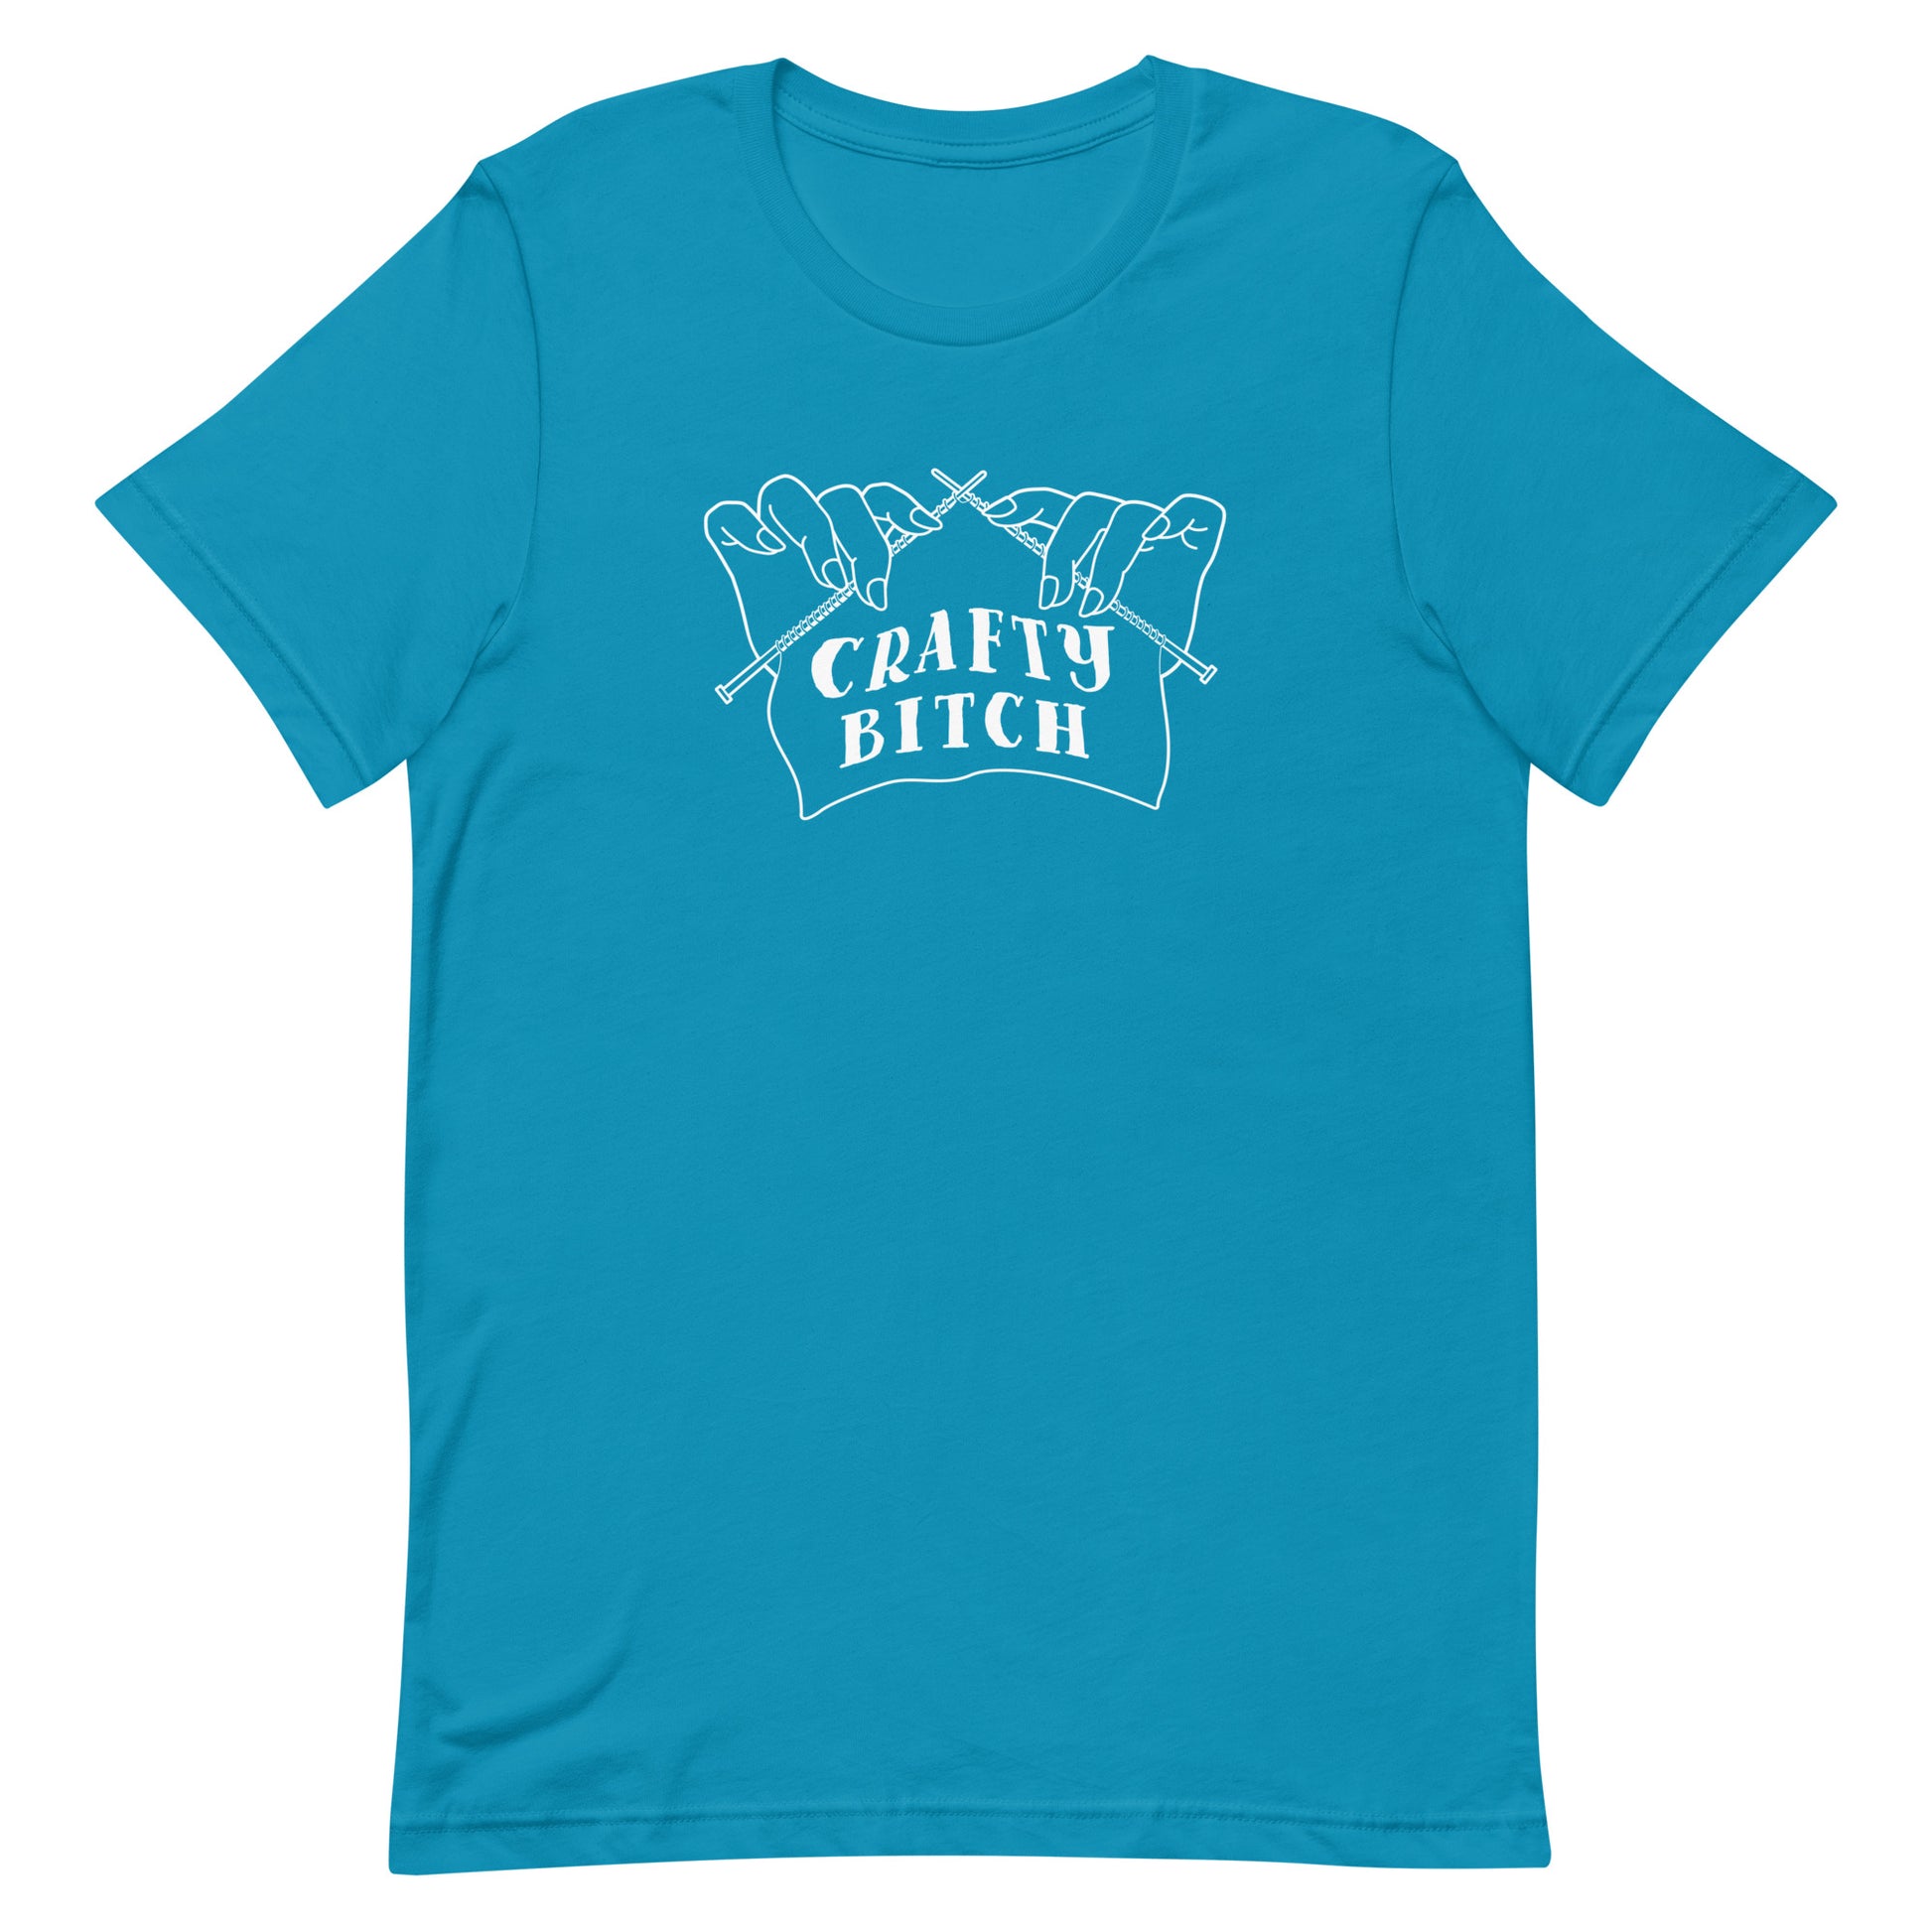 A blue crewneck t-shirt featuring a single-color illustration of a pair of hands holding knitting needles. Fabric on the needles features text that reads "crafty bitch".